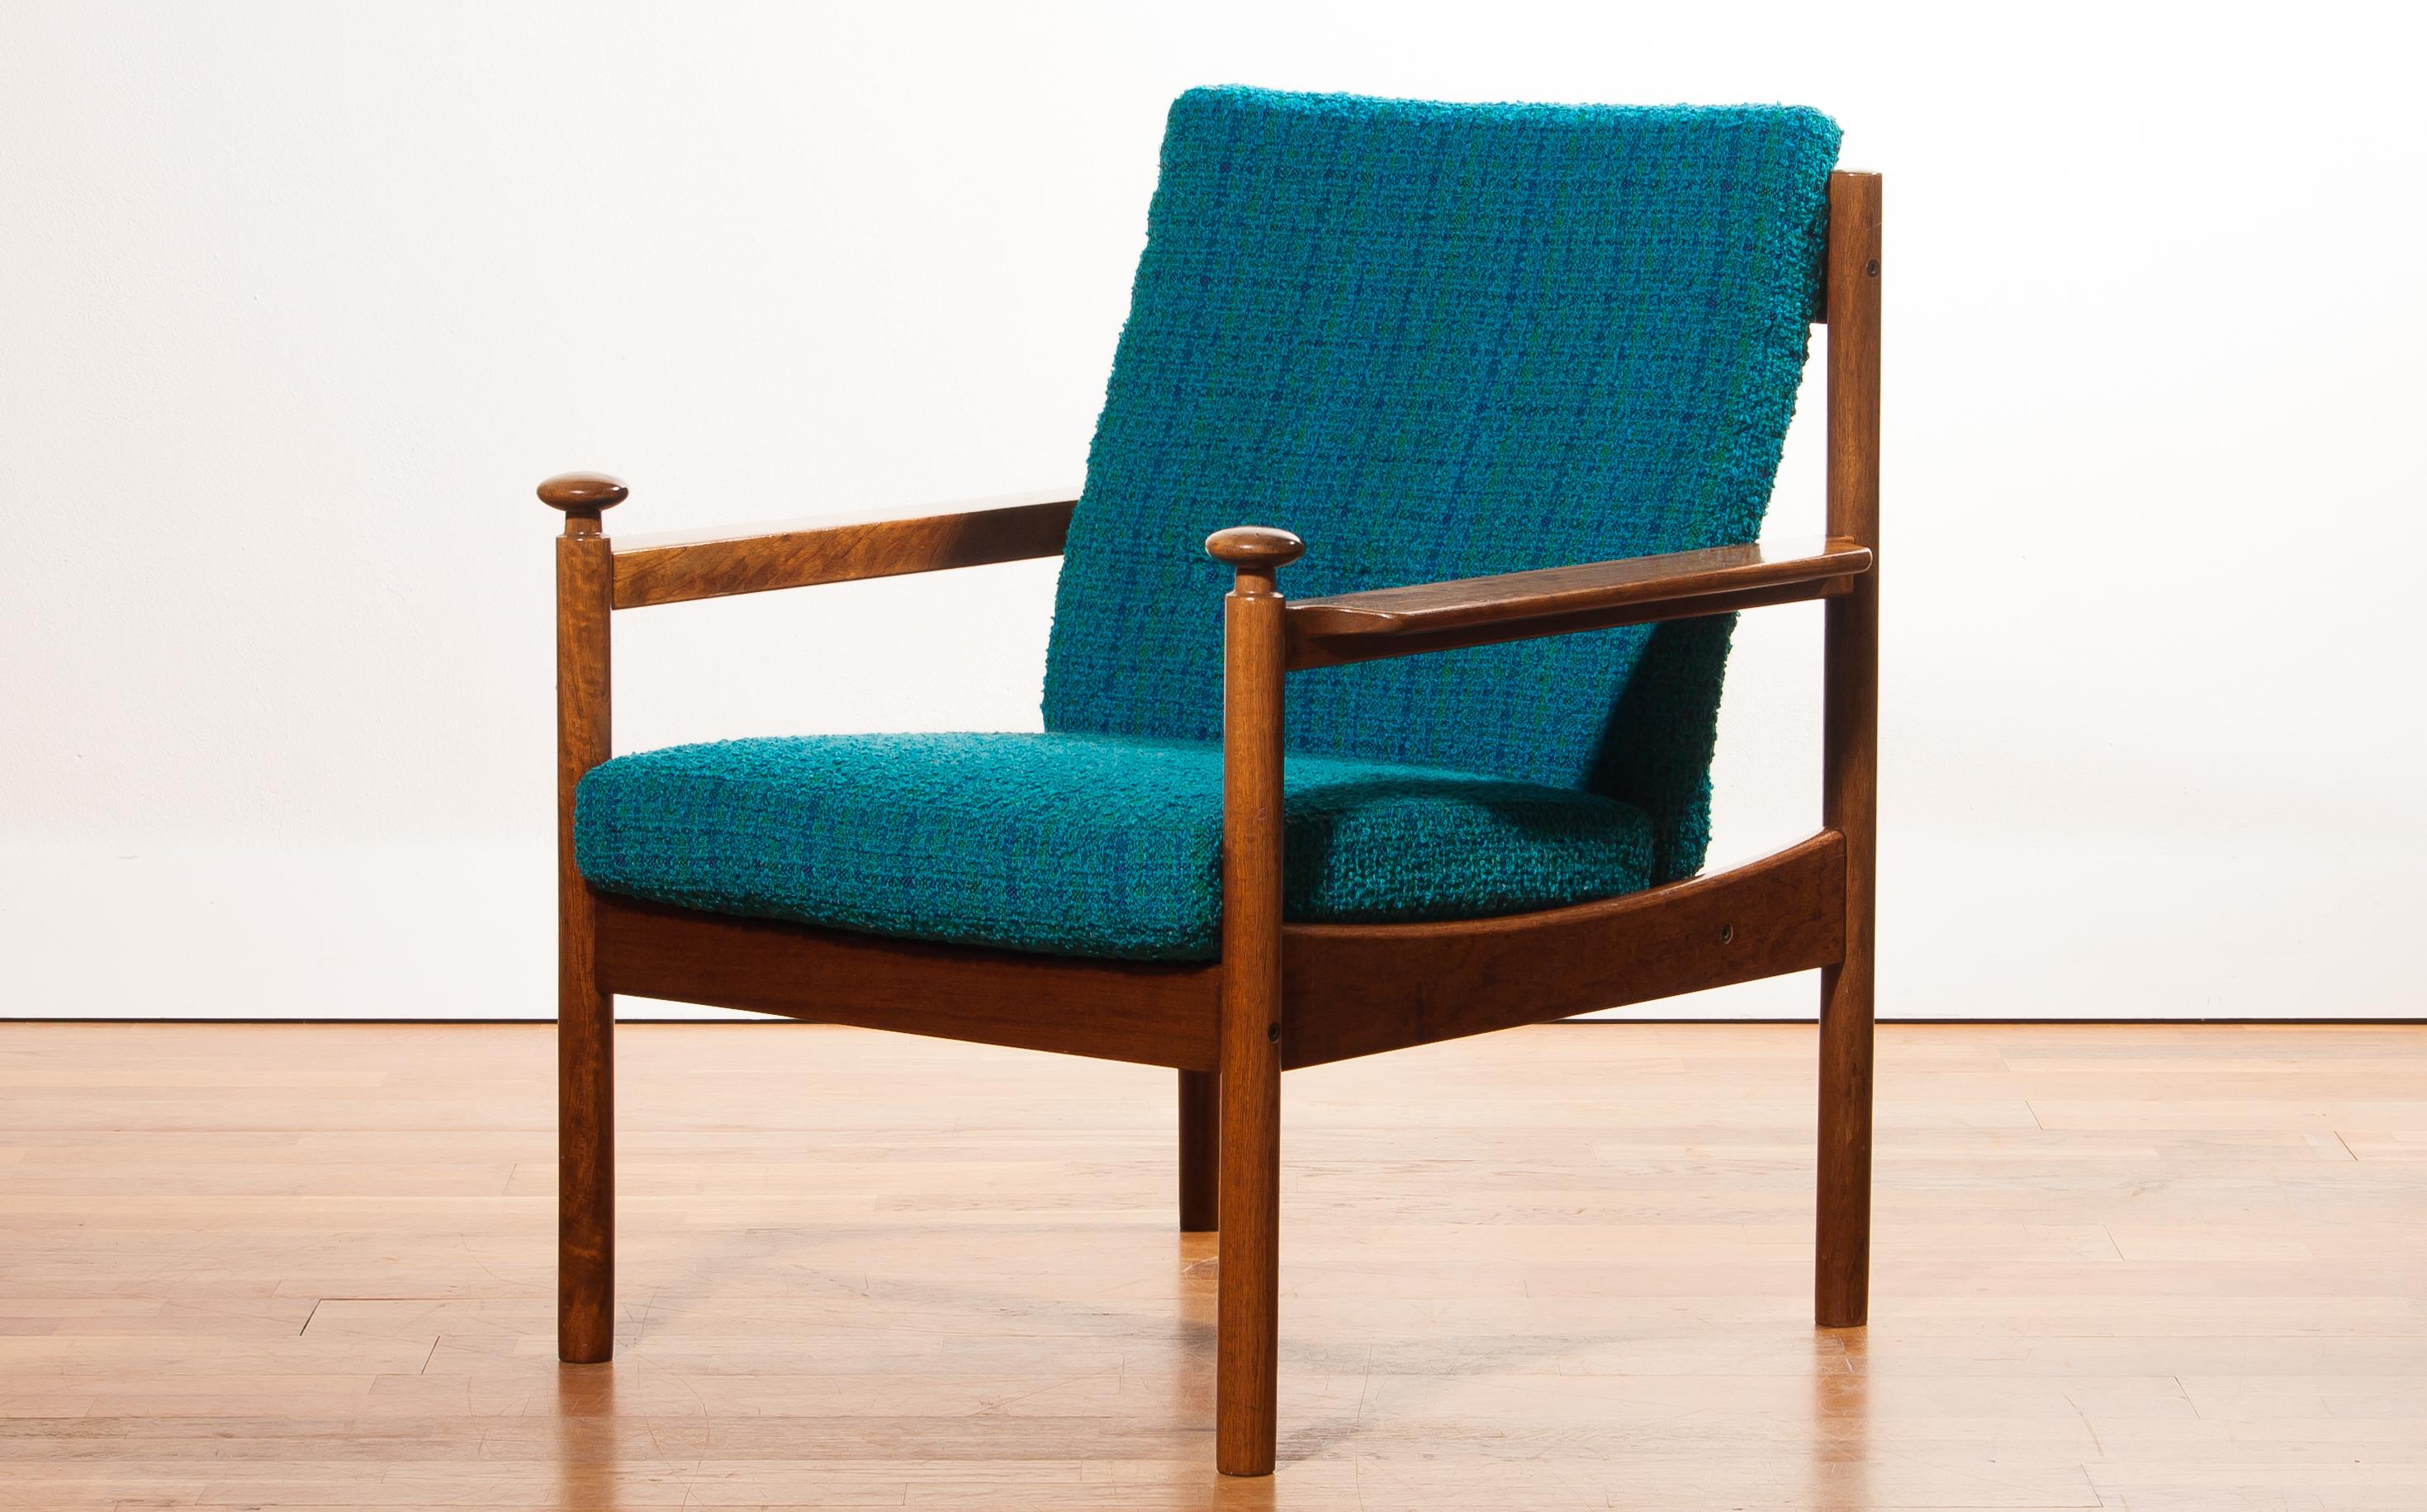 Beautiful chair designed by Torbjørn Afdal for Sandvik & Co. Mobler, Norway.
The wooden frame with the blue fabric cushions makes it a very nice combination.
It is in good condition wear consistent with age and use.
Period 1950s
Dimensions: H 83